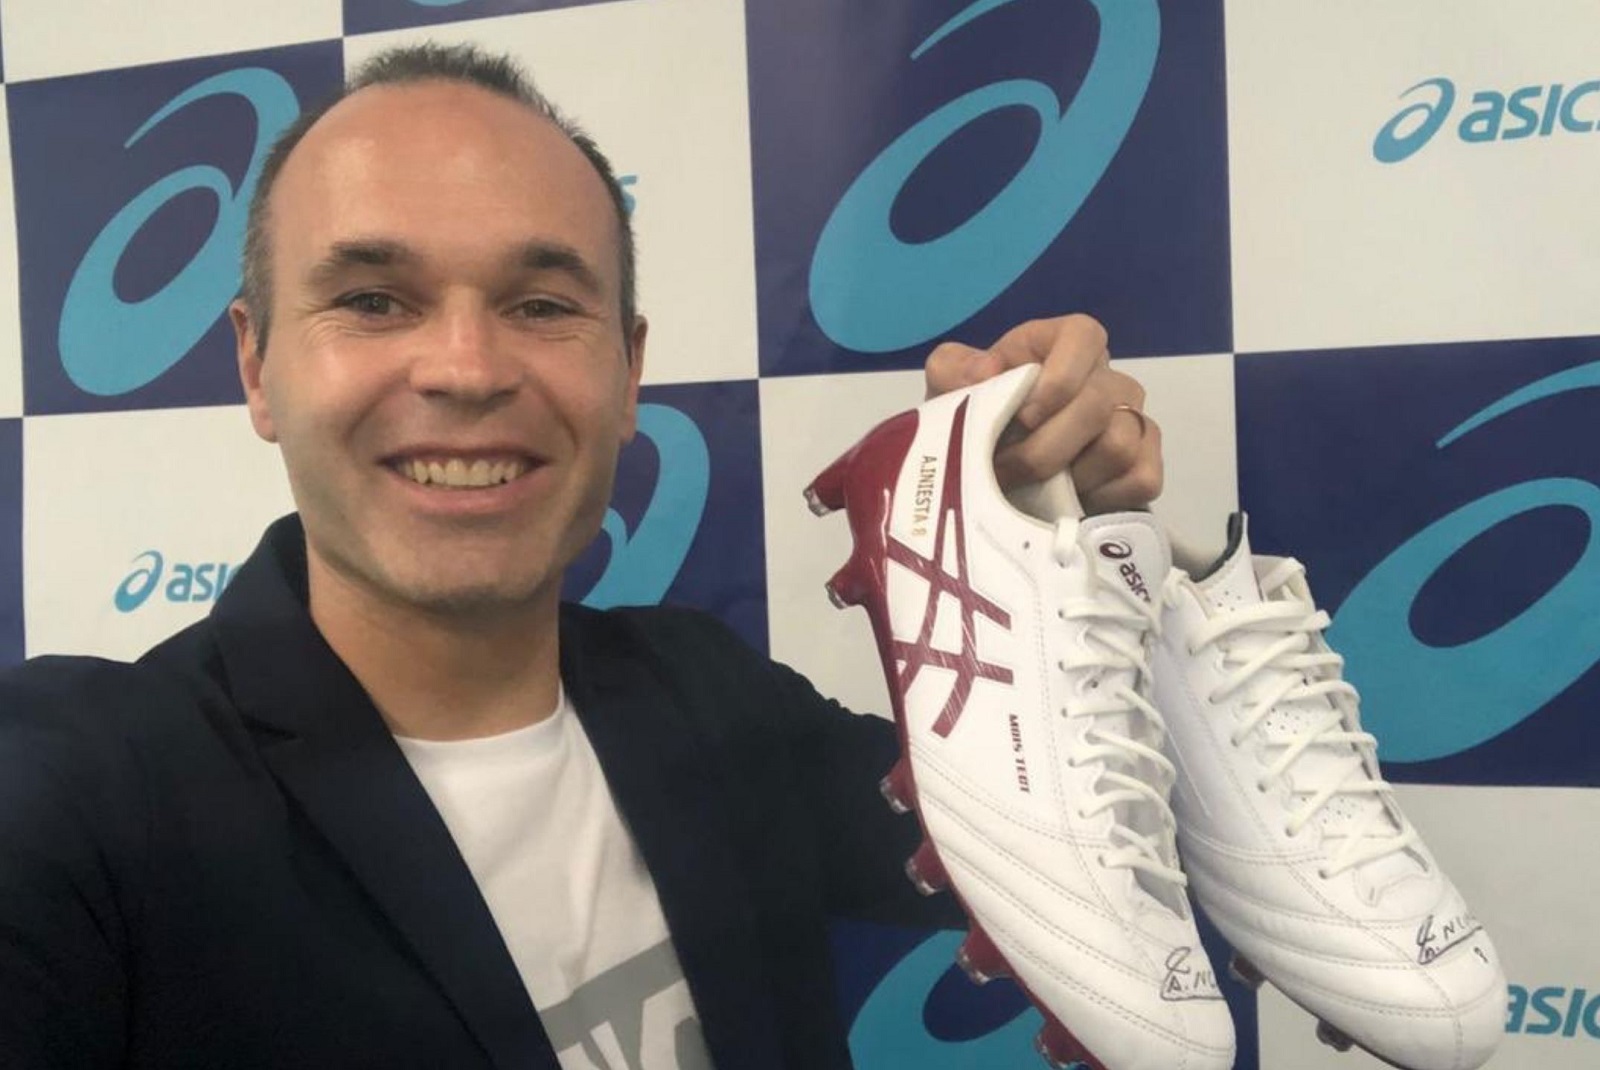 Iniesta Asics Boots | Soccer Cleats 101